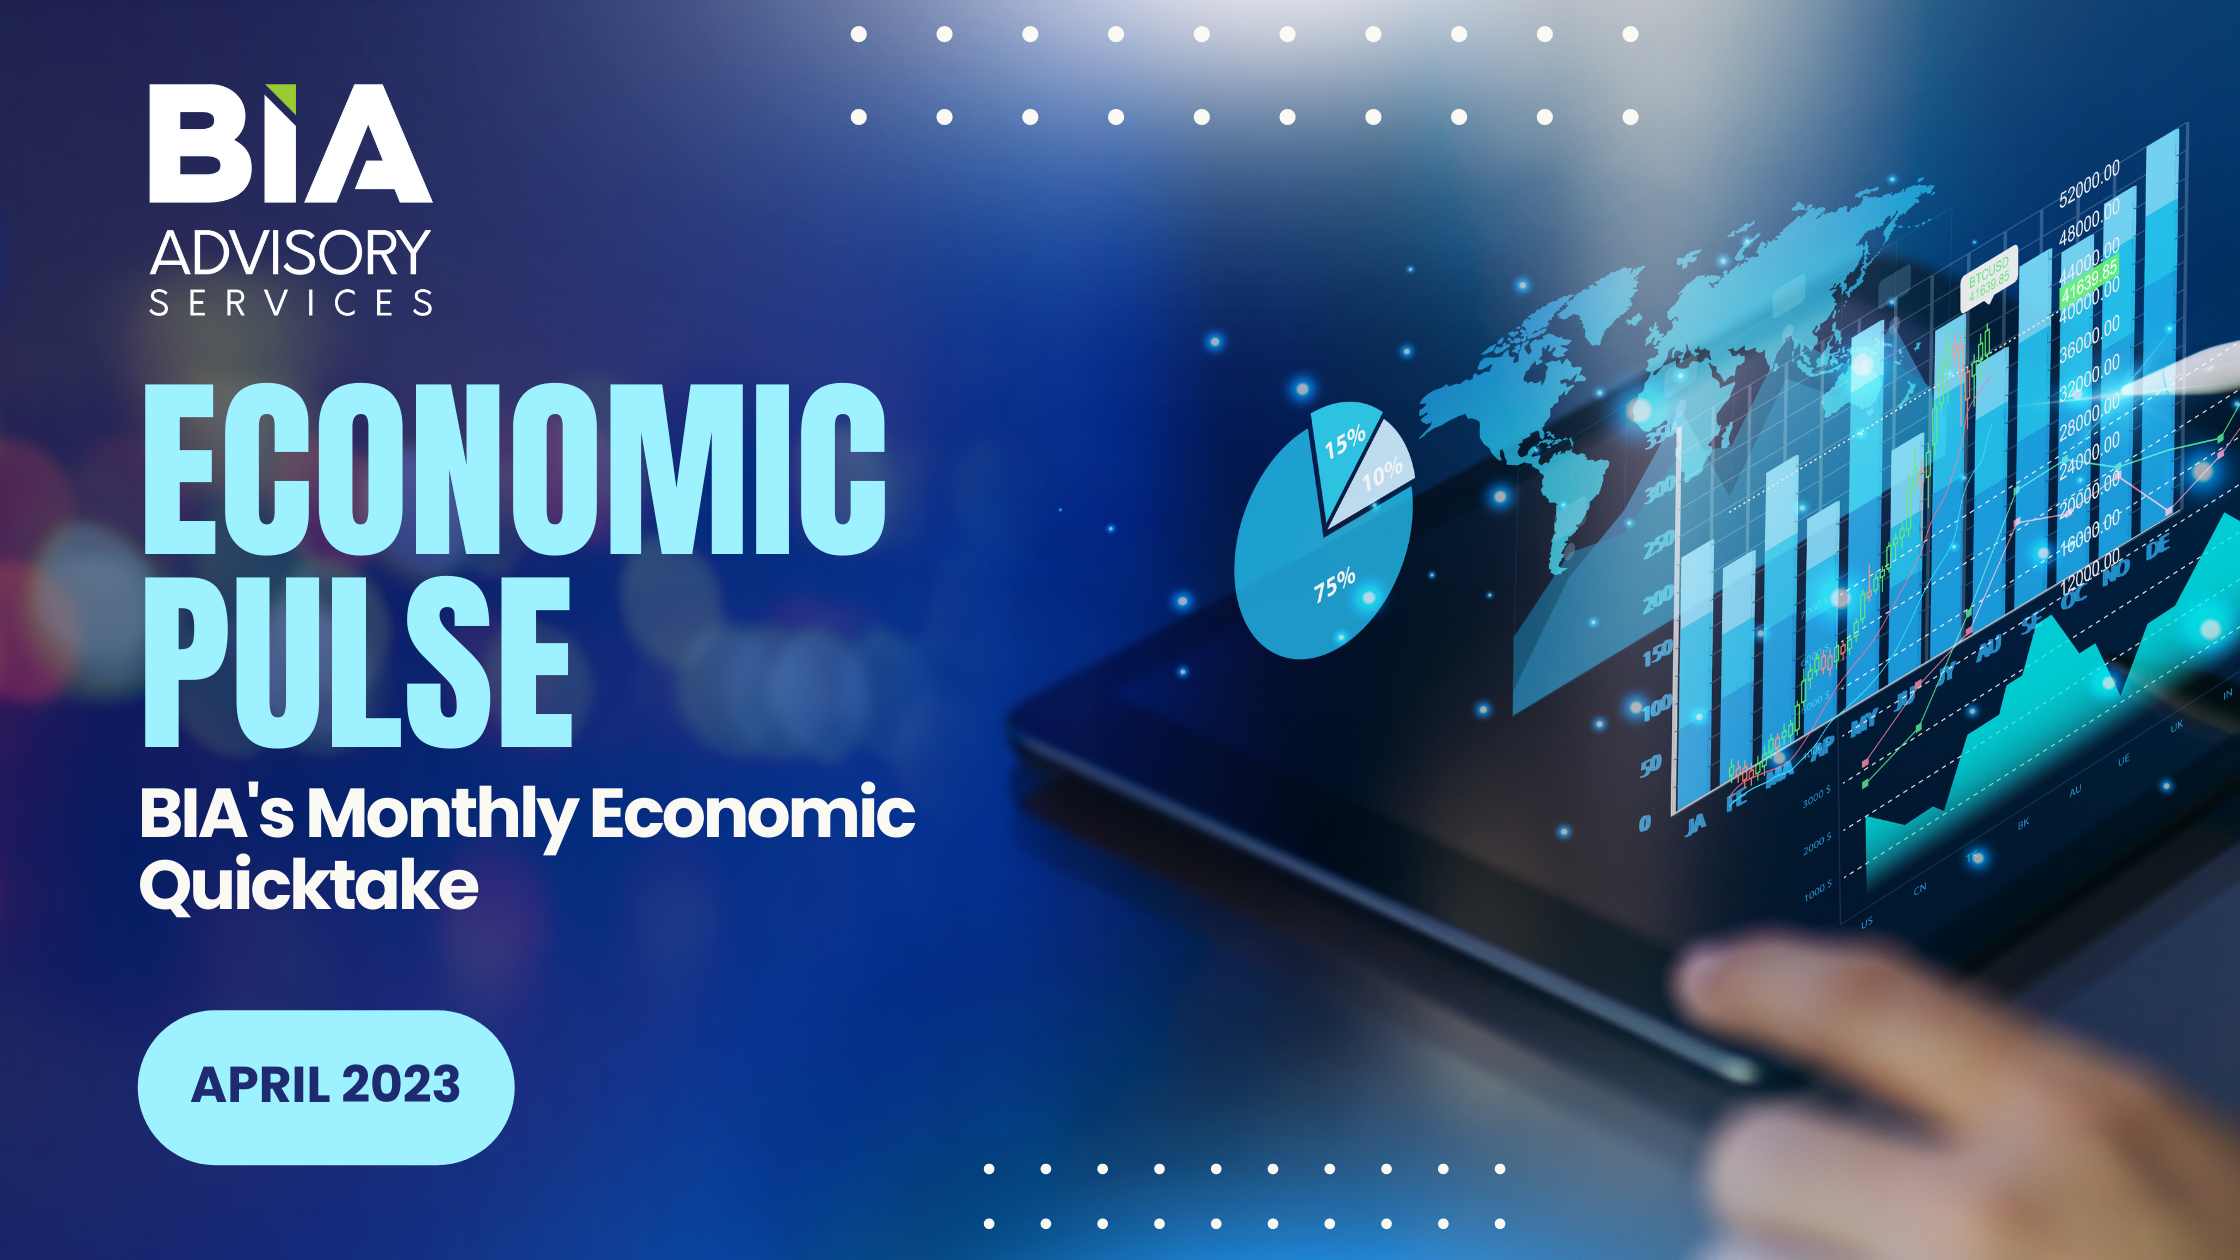 Economic Pulse: BIA’s Monthly Quick Take for April 2023